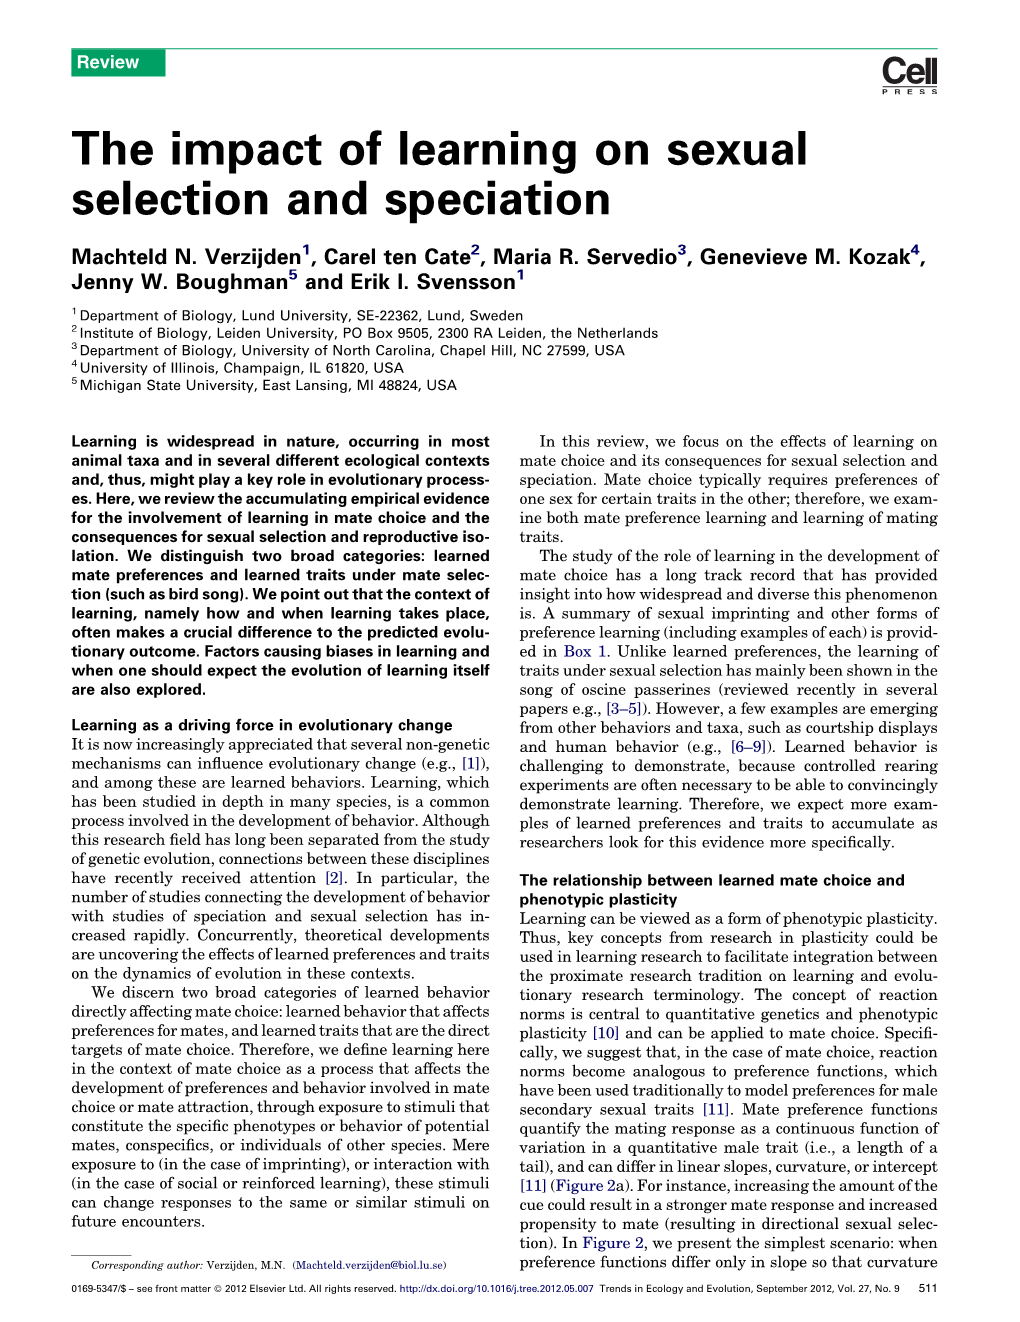 The Impact of Learning on Sexual Selection and Speciation